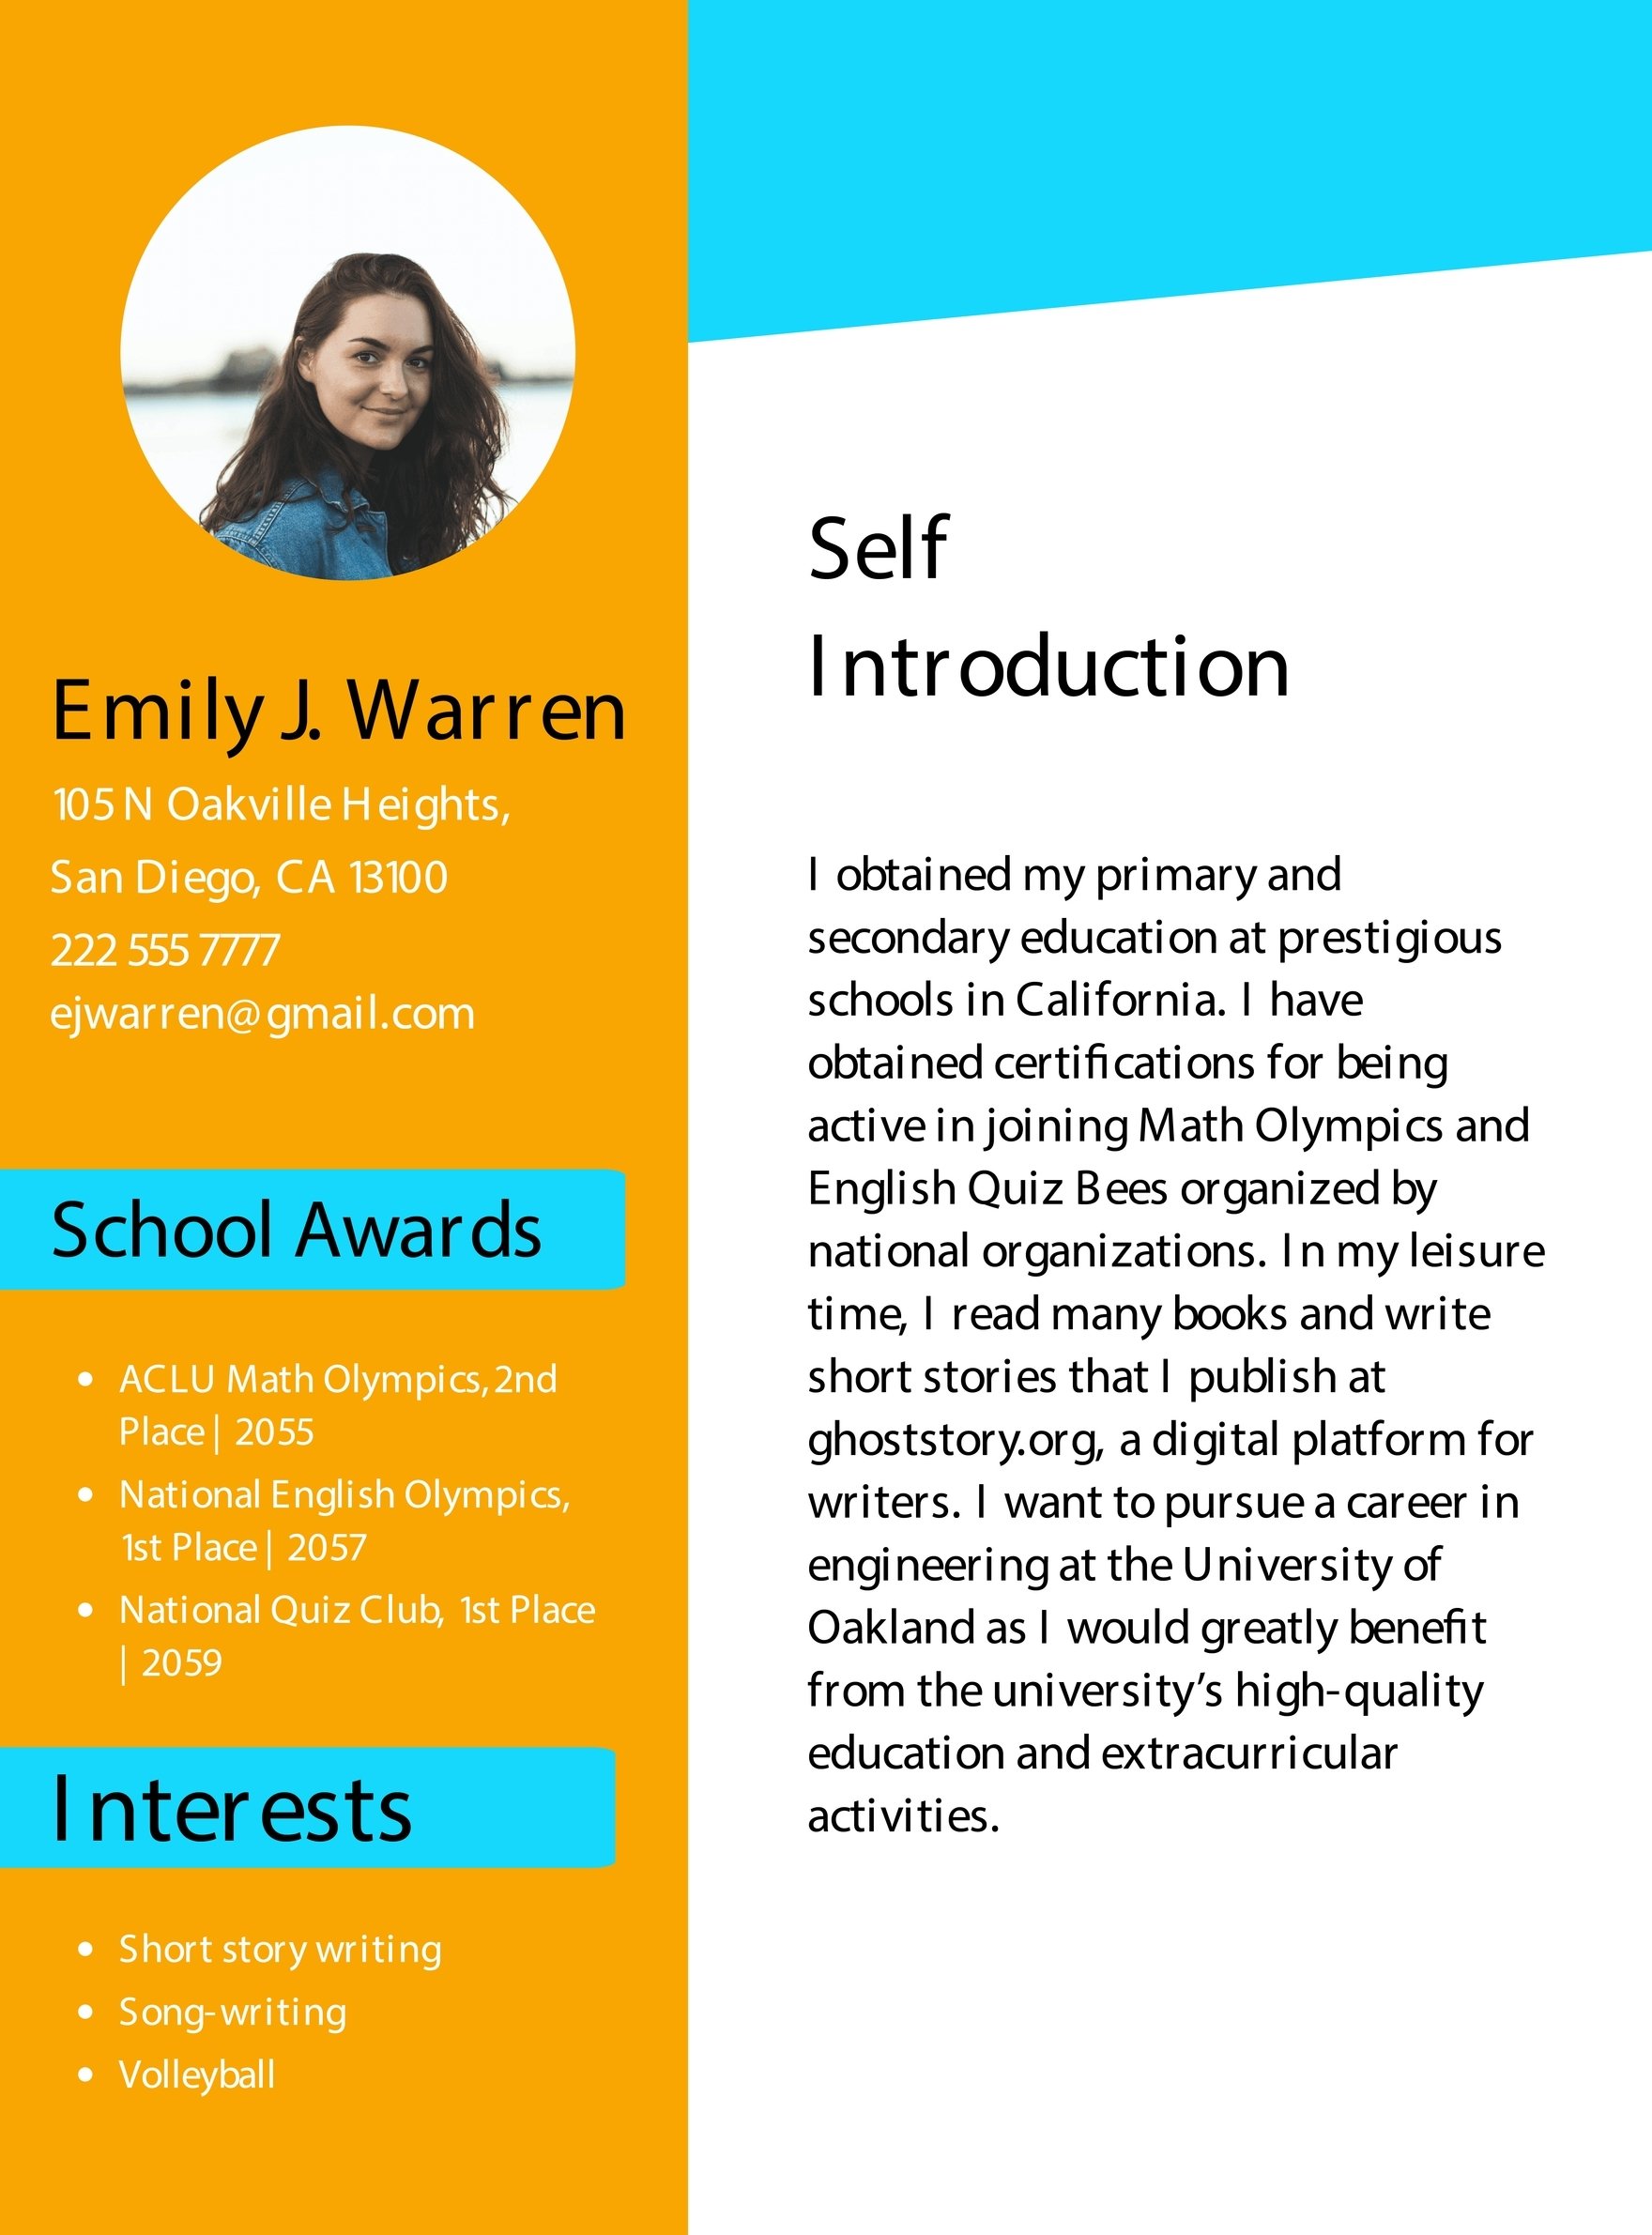 Student Self Introduction Template in JPG